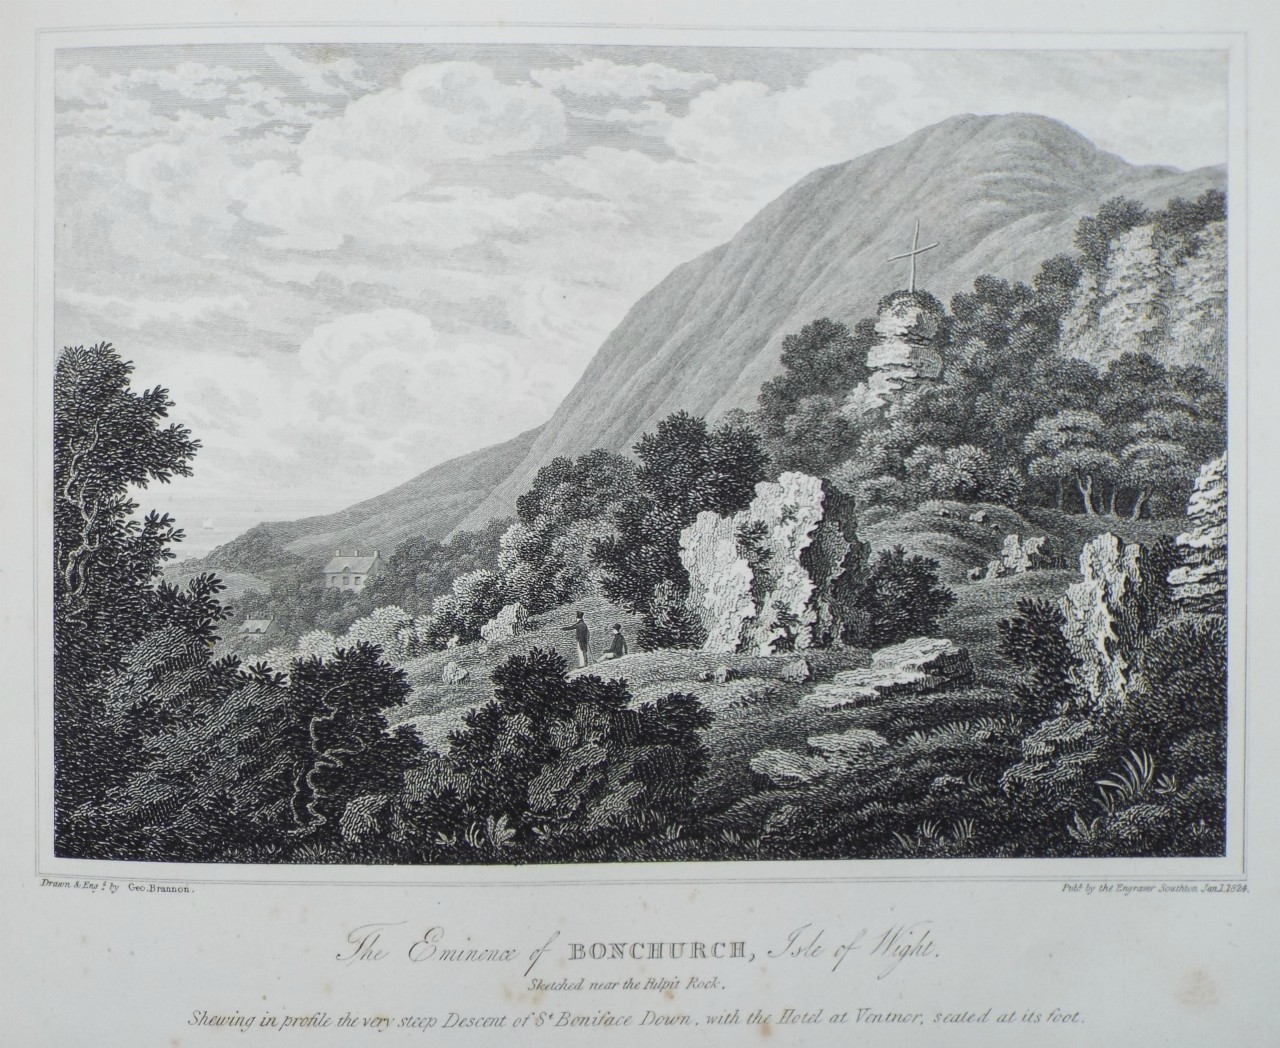 Print - The Eminence of Bonchurch, Isle of Wight, Sketched near the Pulpit Rock. - Brannon